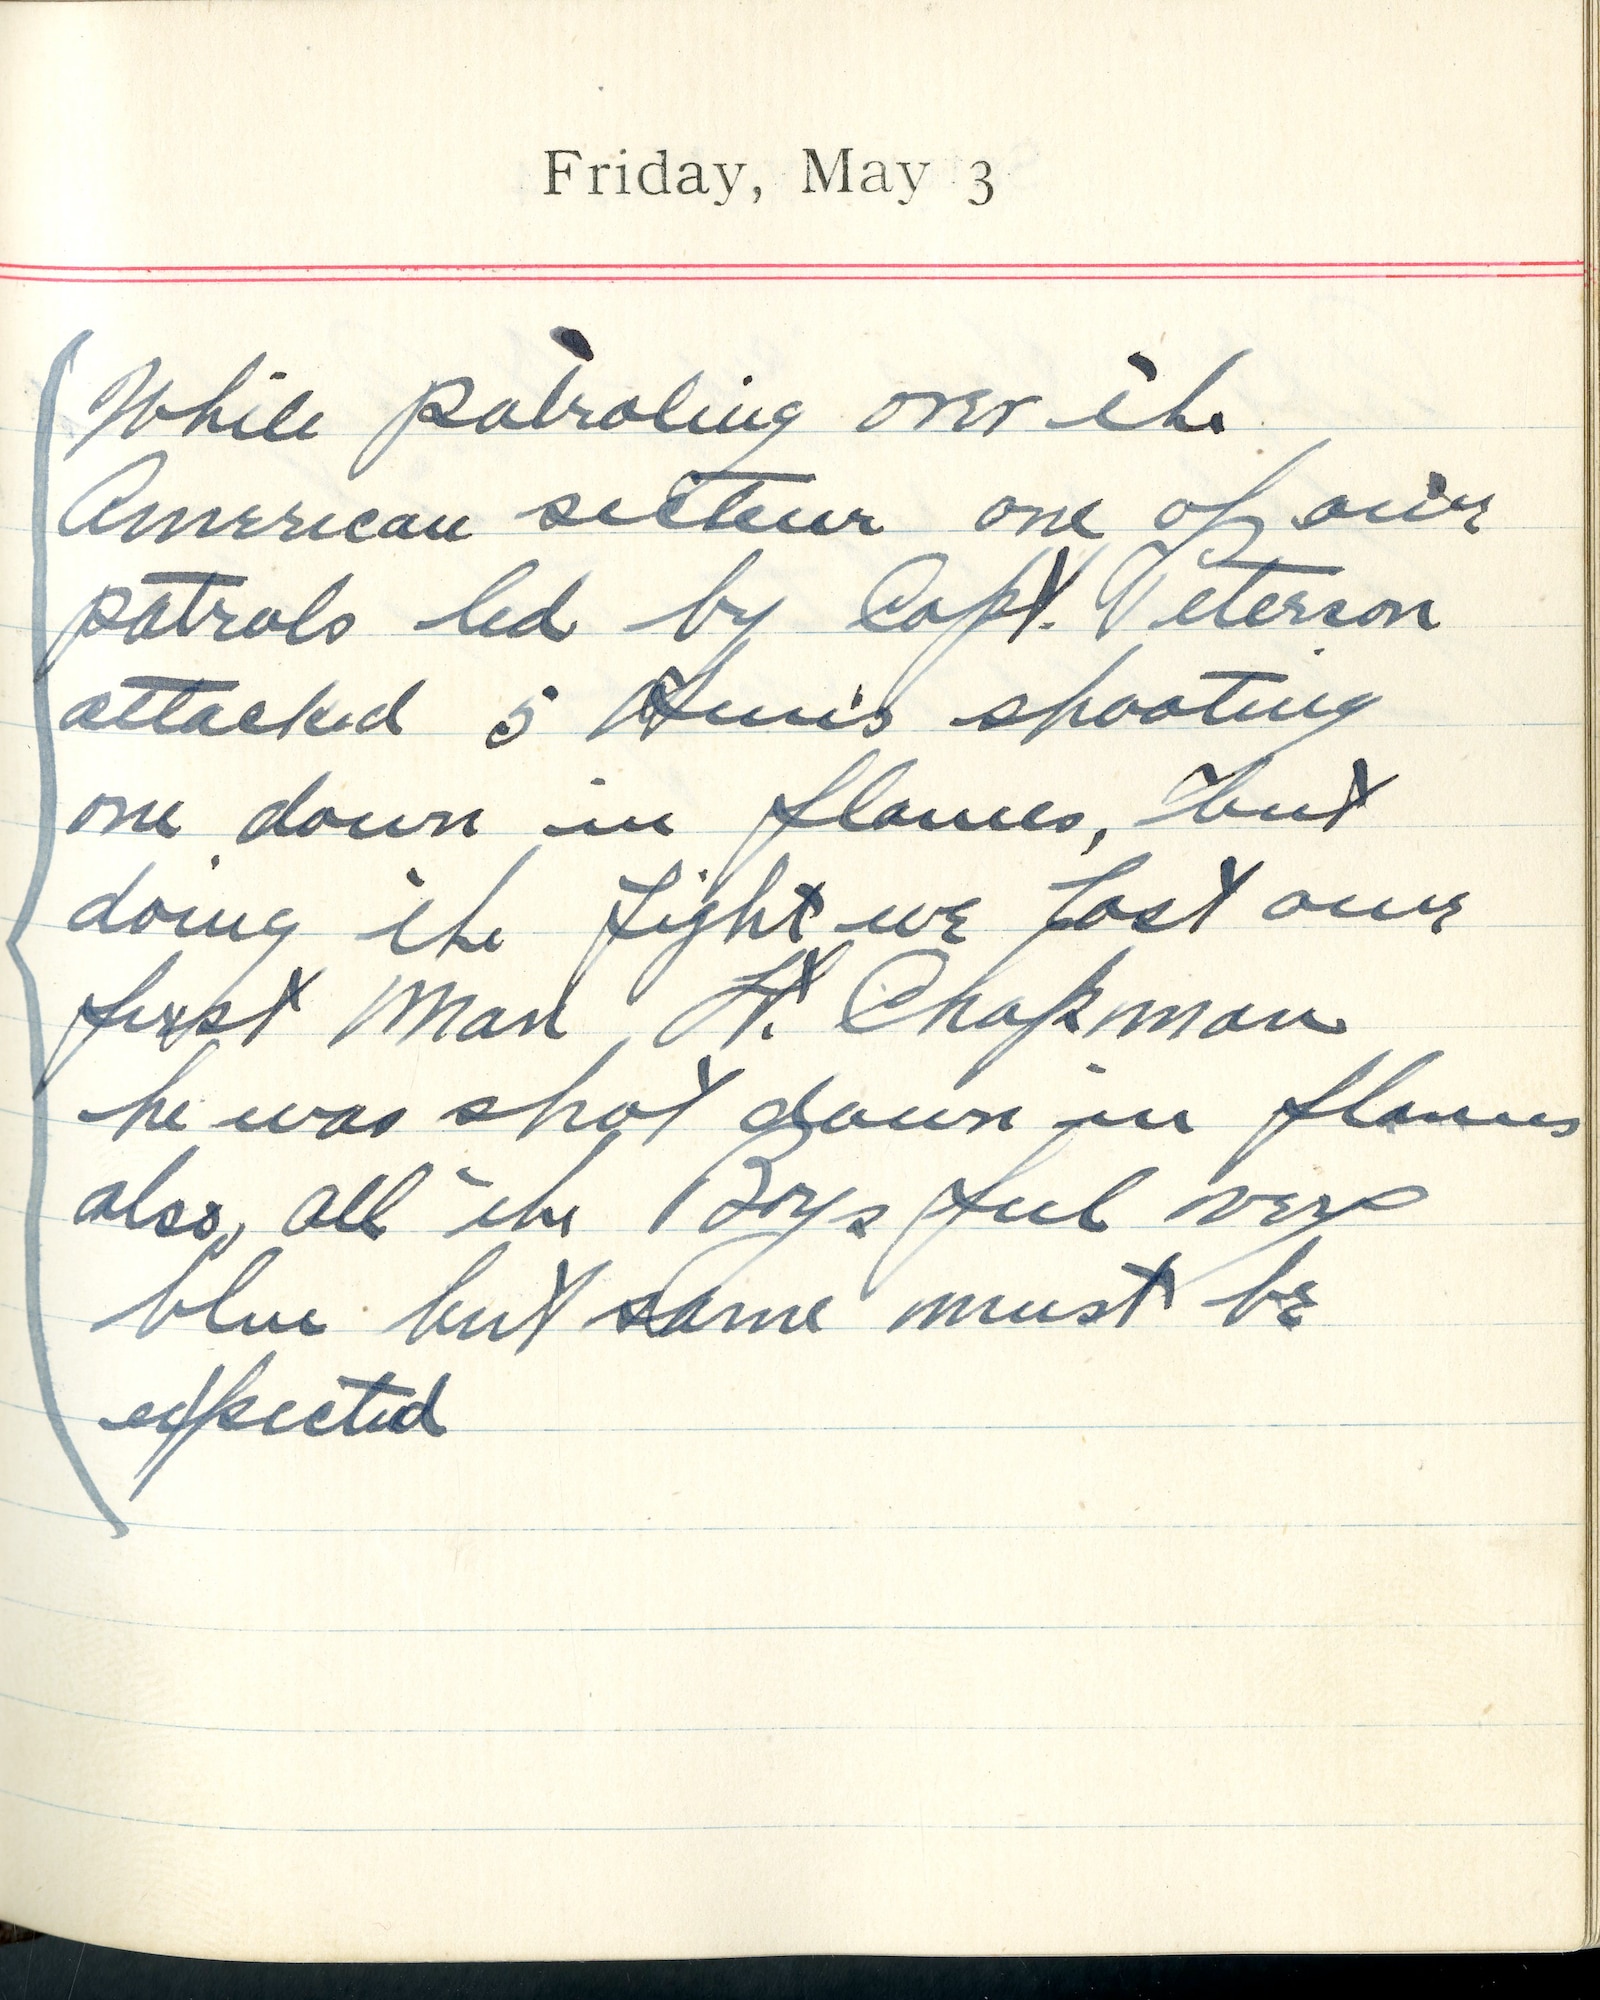 Capt. Edward V. Rickenbacker's 1918 wartime diary entry. (05/03/1918).

While patrolling over the American sector, one of our patrols led by Capt. Peterson attacked 5 Huns shooting one down in flames but doing the fight, we lost our first man.  Lt. [Charles W.] Chapman.  He was shot down in flames.  Also all the boys feel very blue but same must be expected.